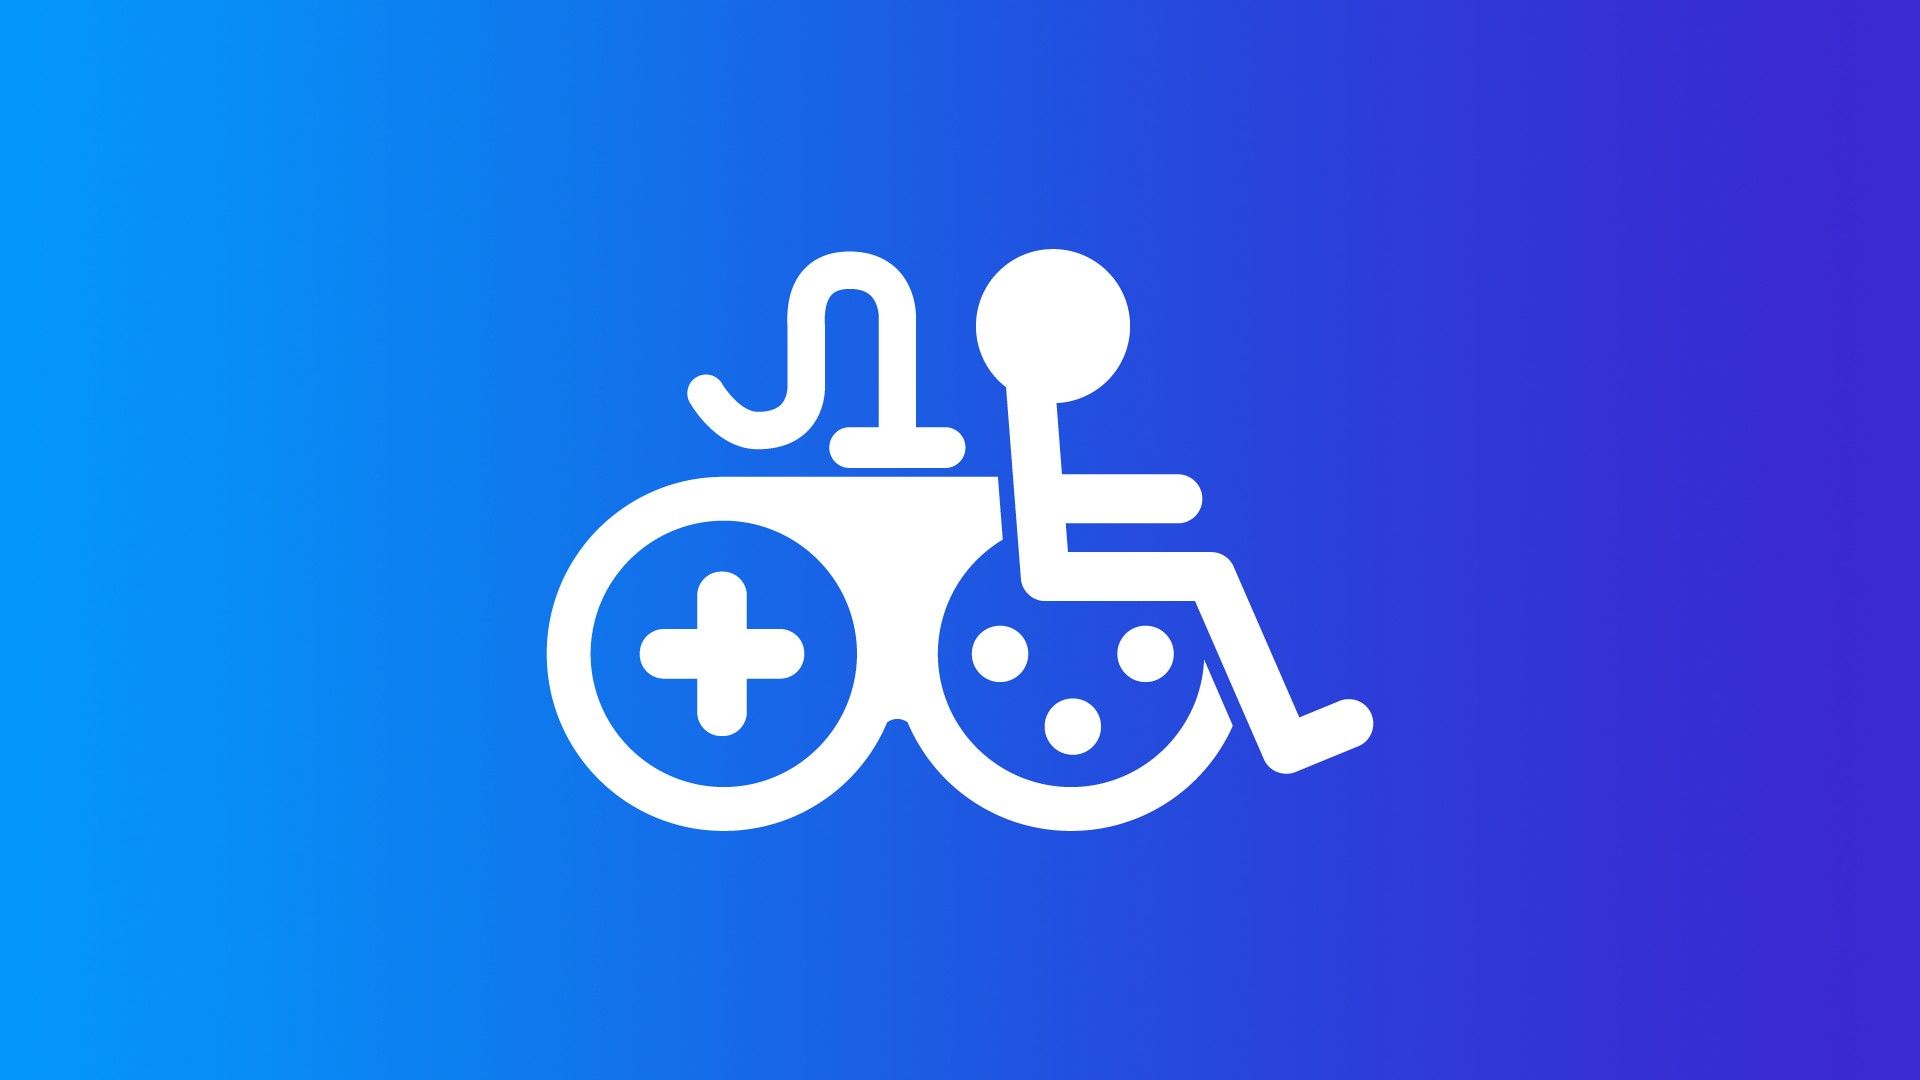 The disability logo, in white, is interwoven with a white game controller against a bright blue background.